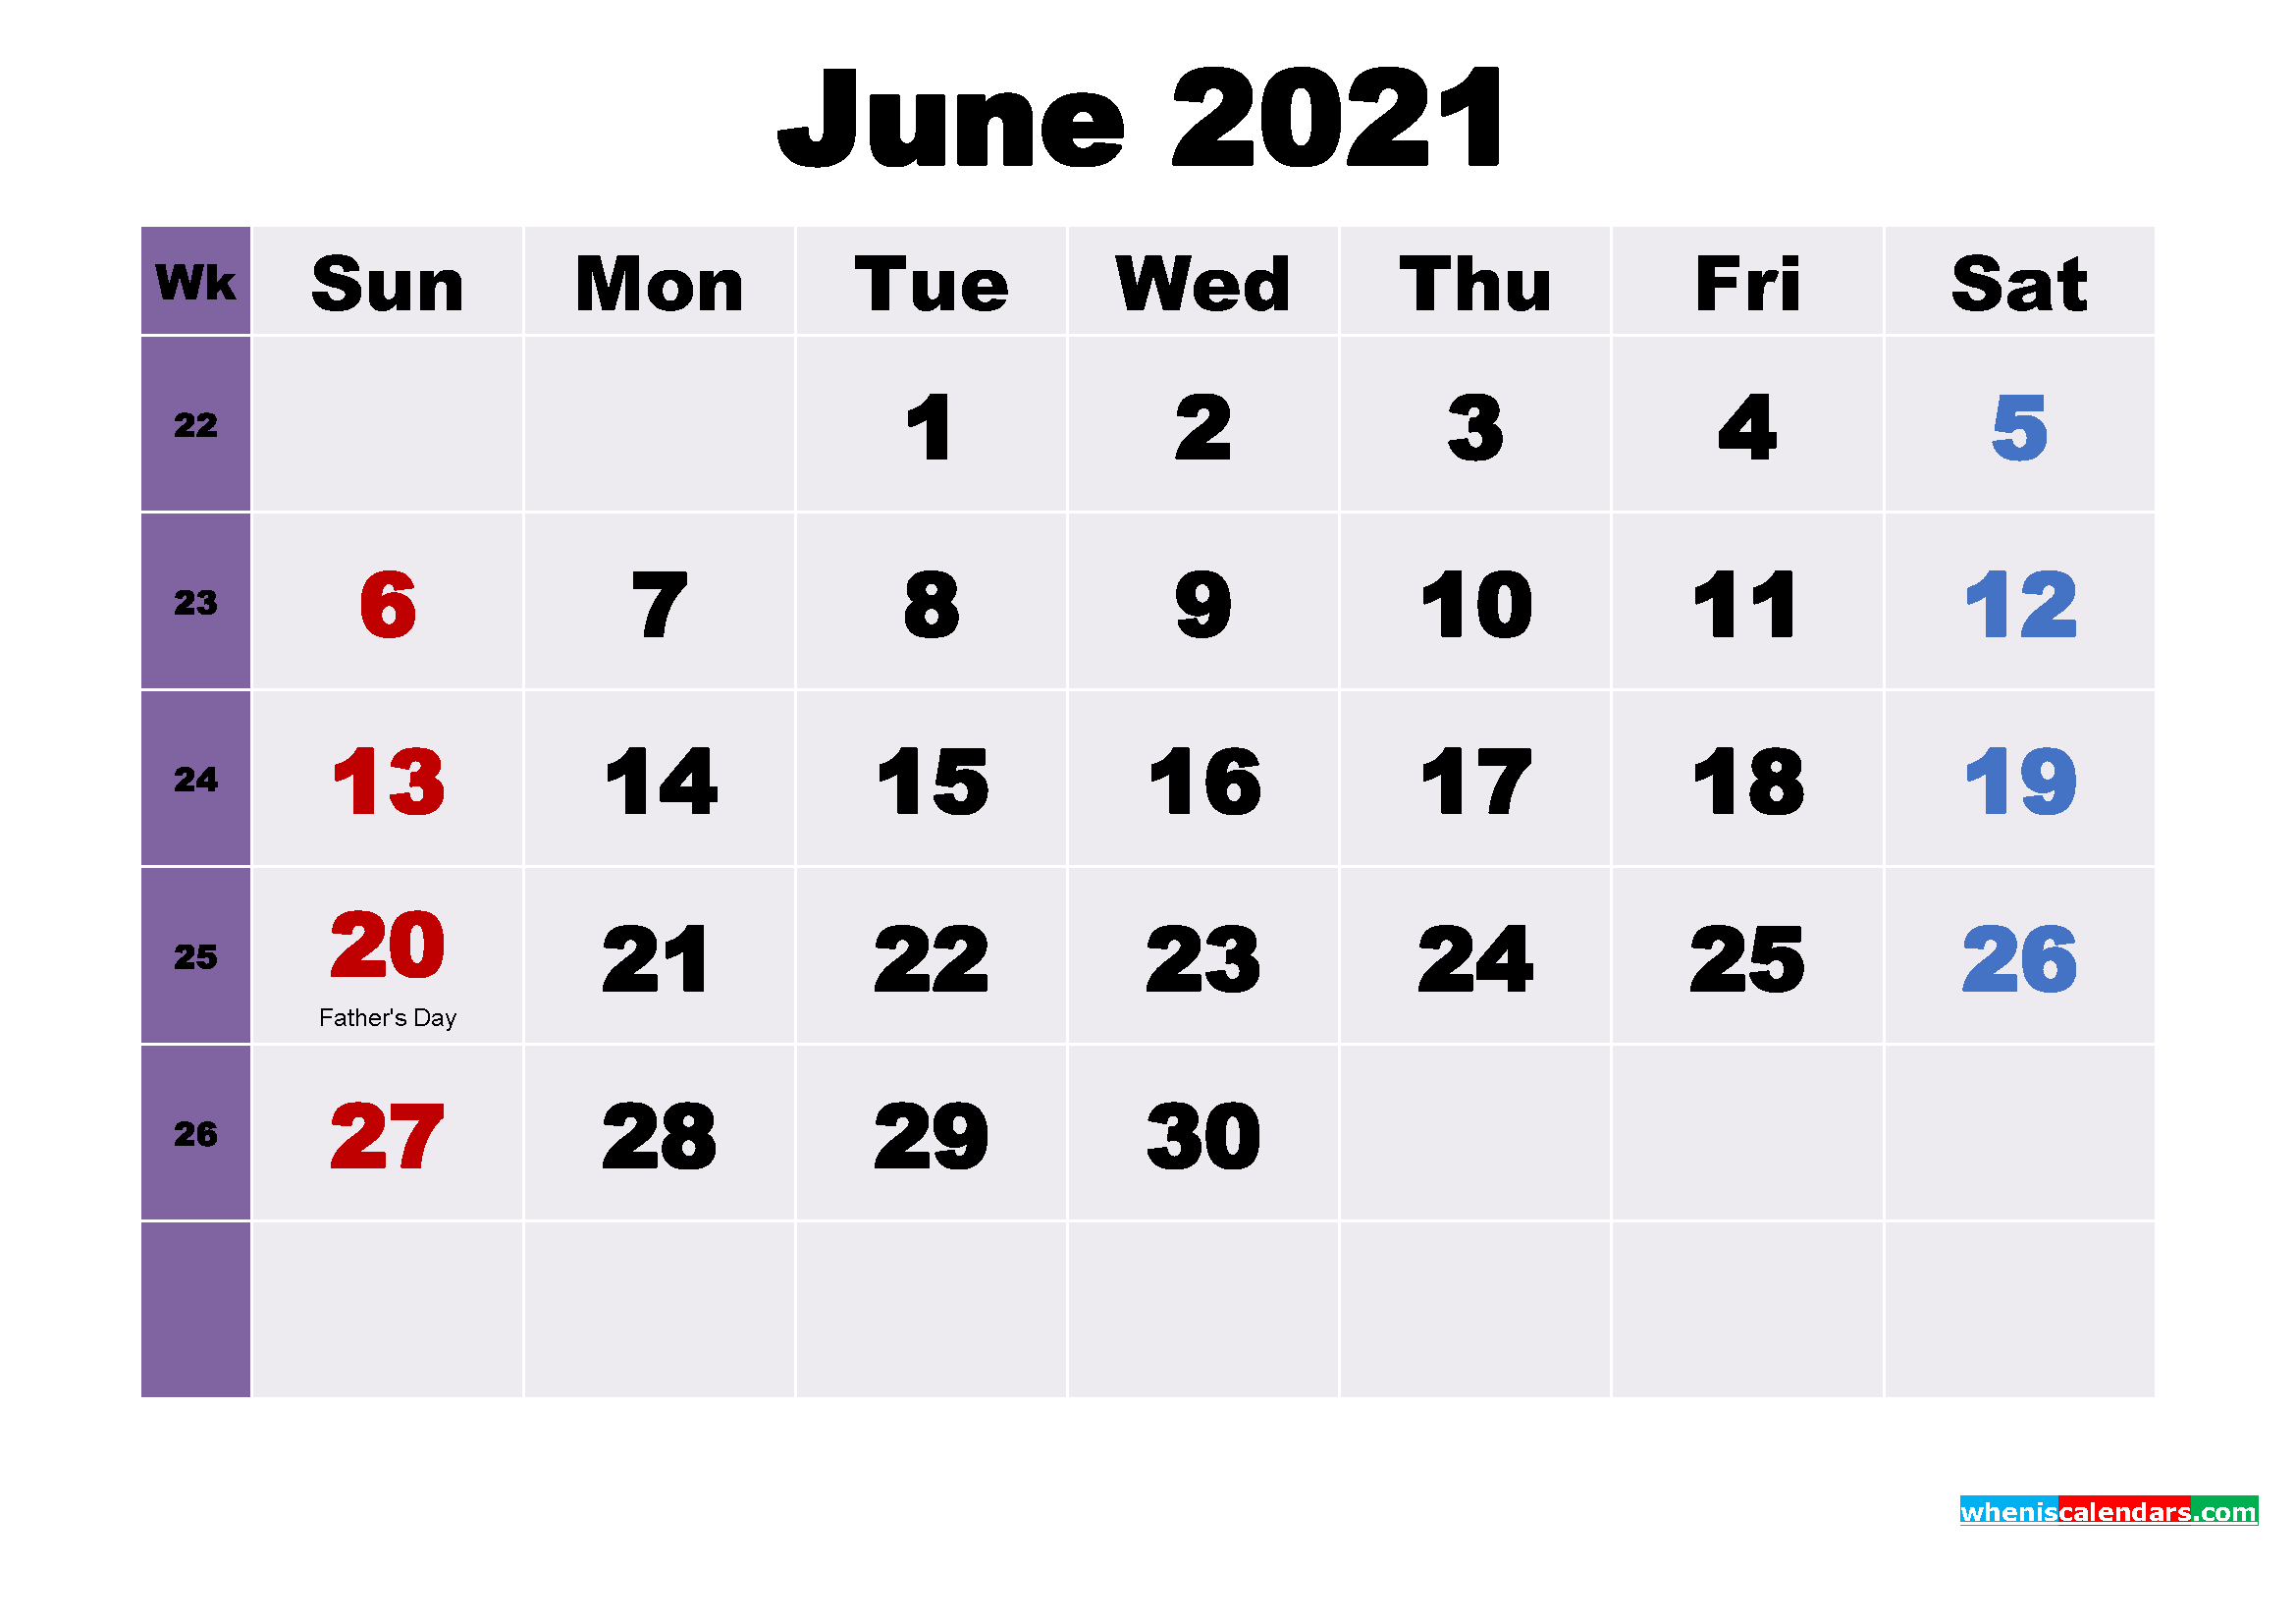 june 2021 desktop calendar June 2021 Desktop Calendar Free Download Free Printable 2020 Monthly Calendar With Holidays june 2021 desktop calendar